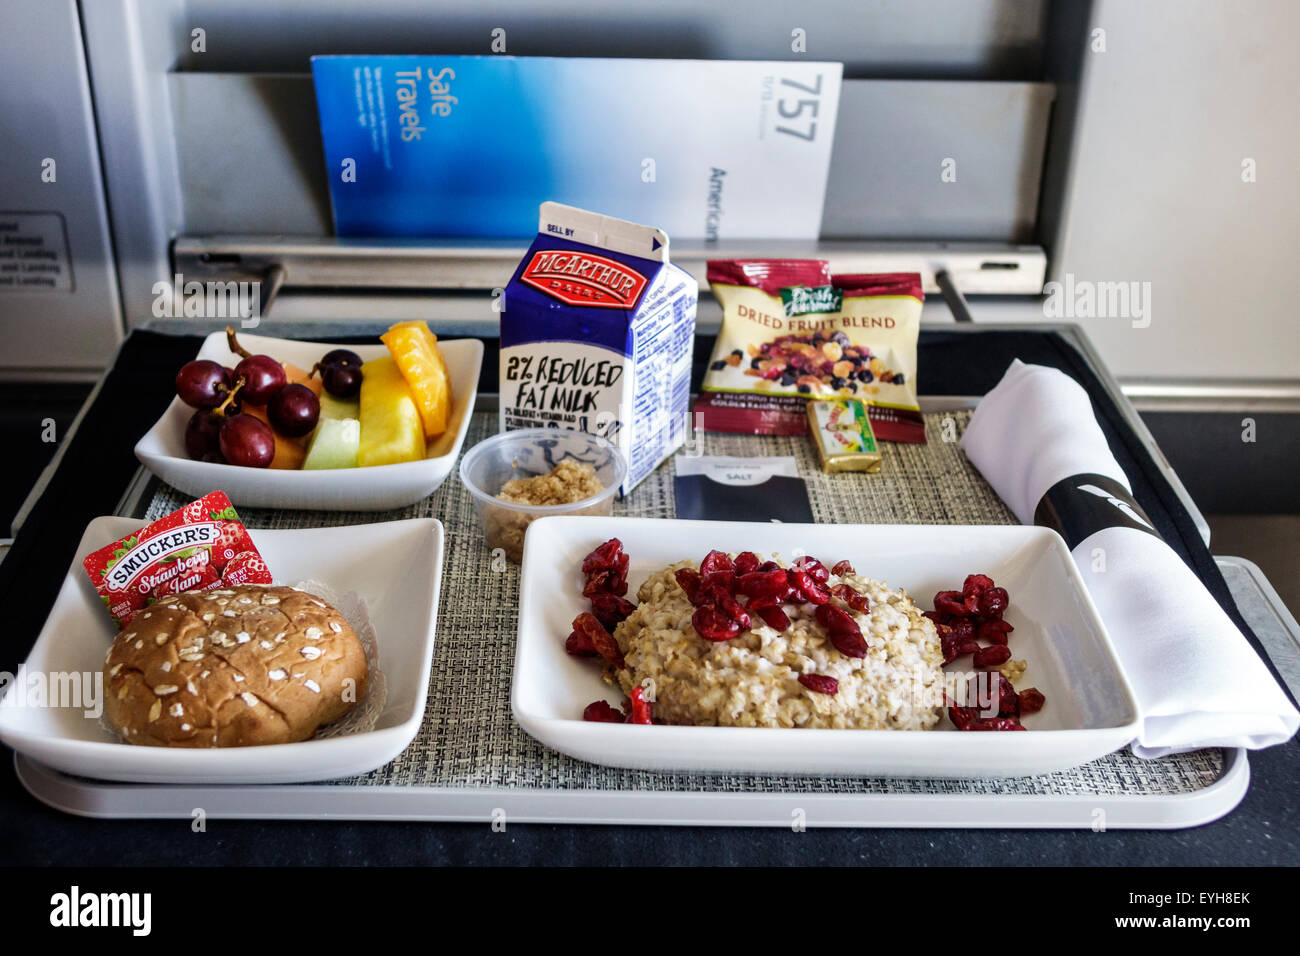 Miami Florida,International Airport,MIA,first class cabin,onboard,American Airlines,breakfast,tray,oatmeal,cranberries,FL150626034 Stock Photo